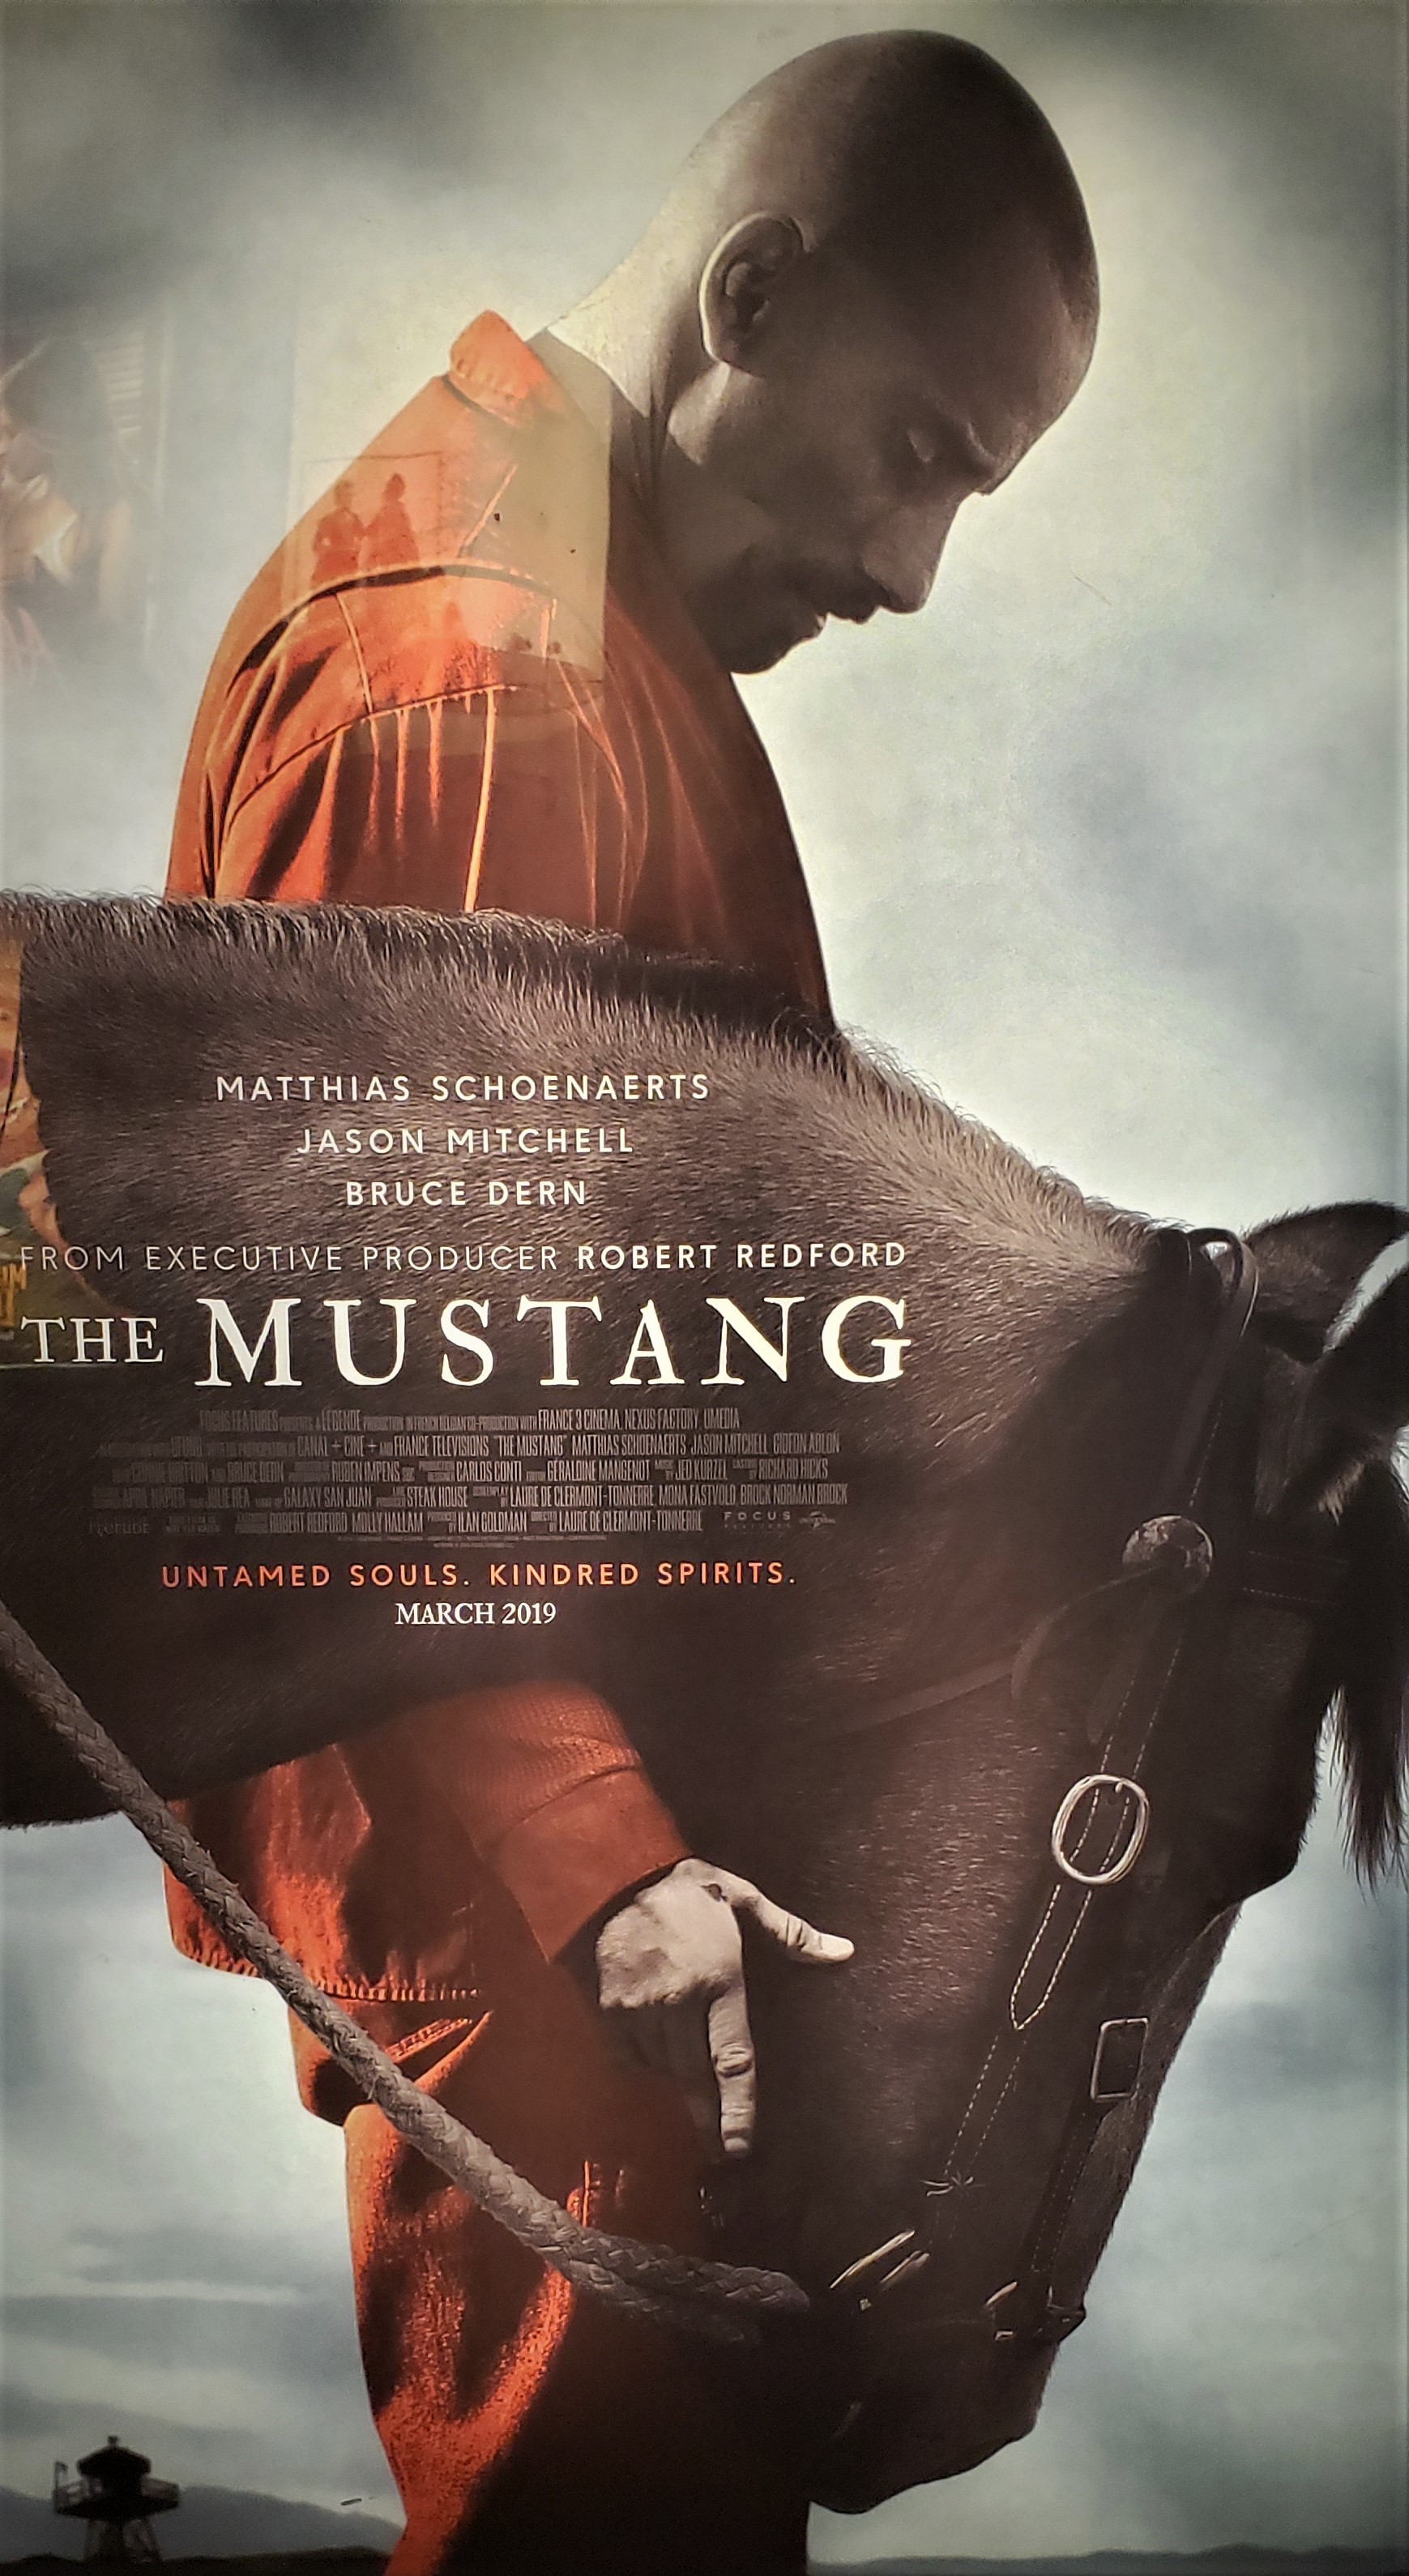 Film Review: The Mustang